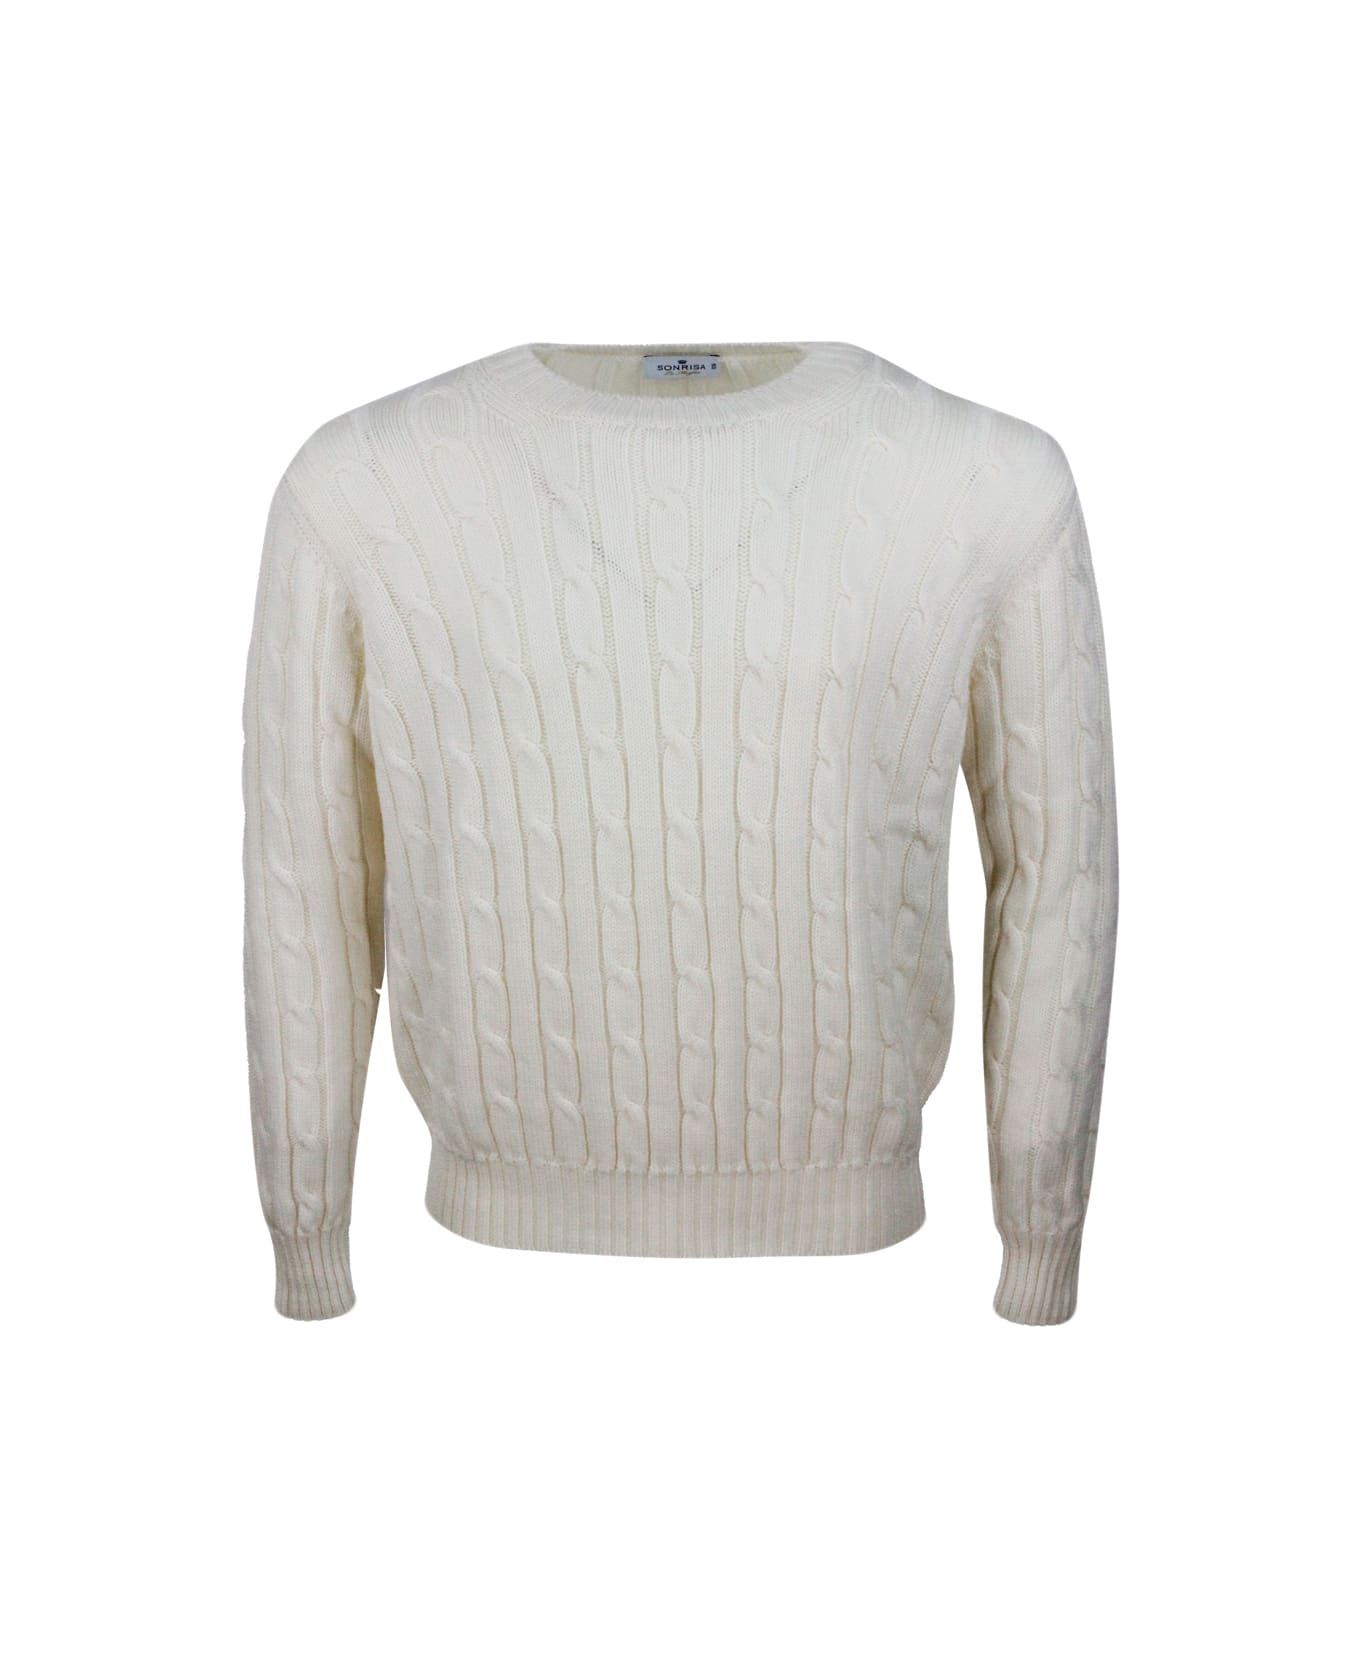 Sonrisa Crewneck Sweater In Fine And Soft Merino Wool With Cable Knit - Cream